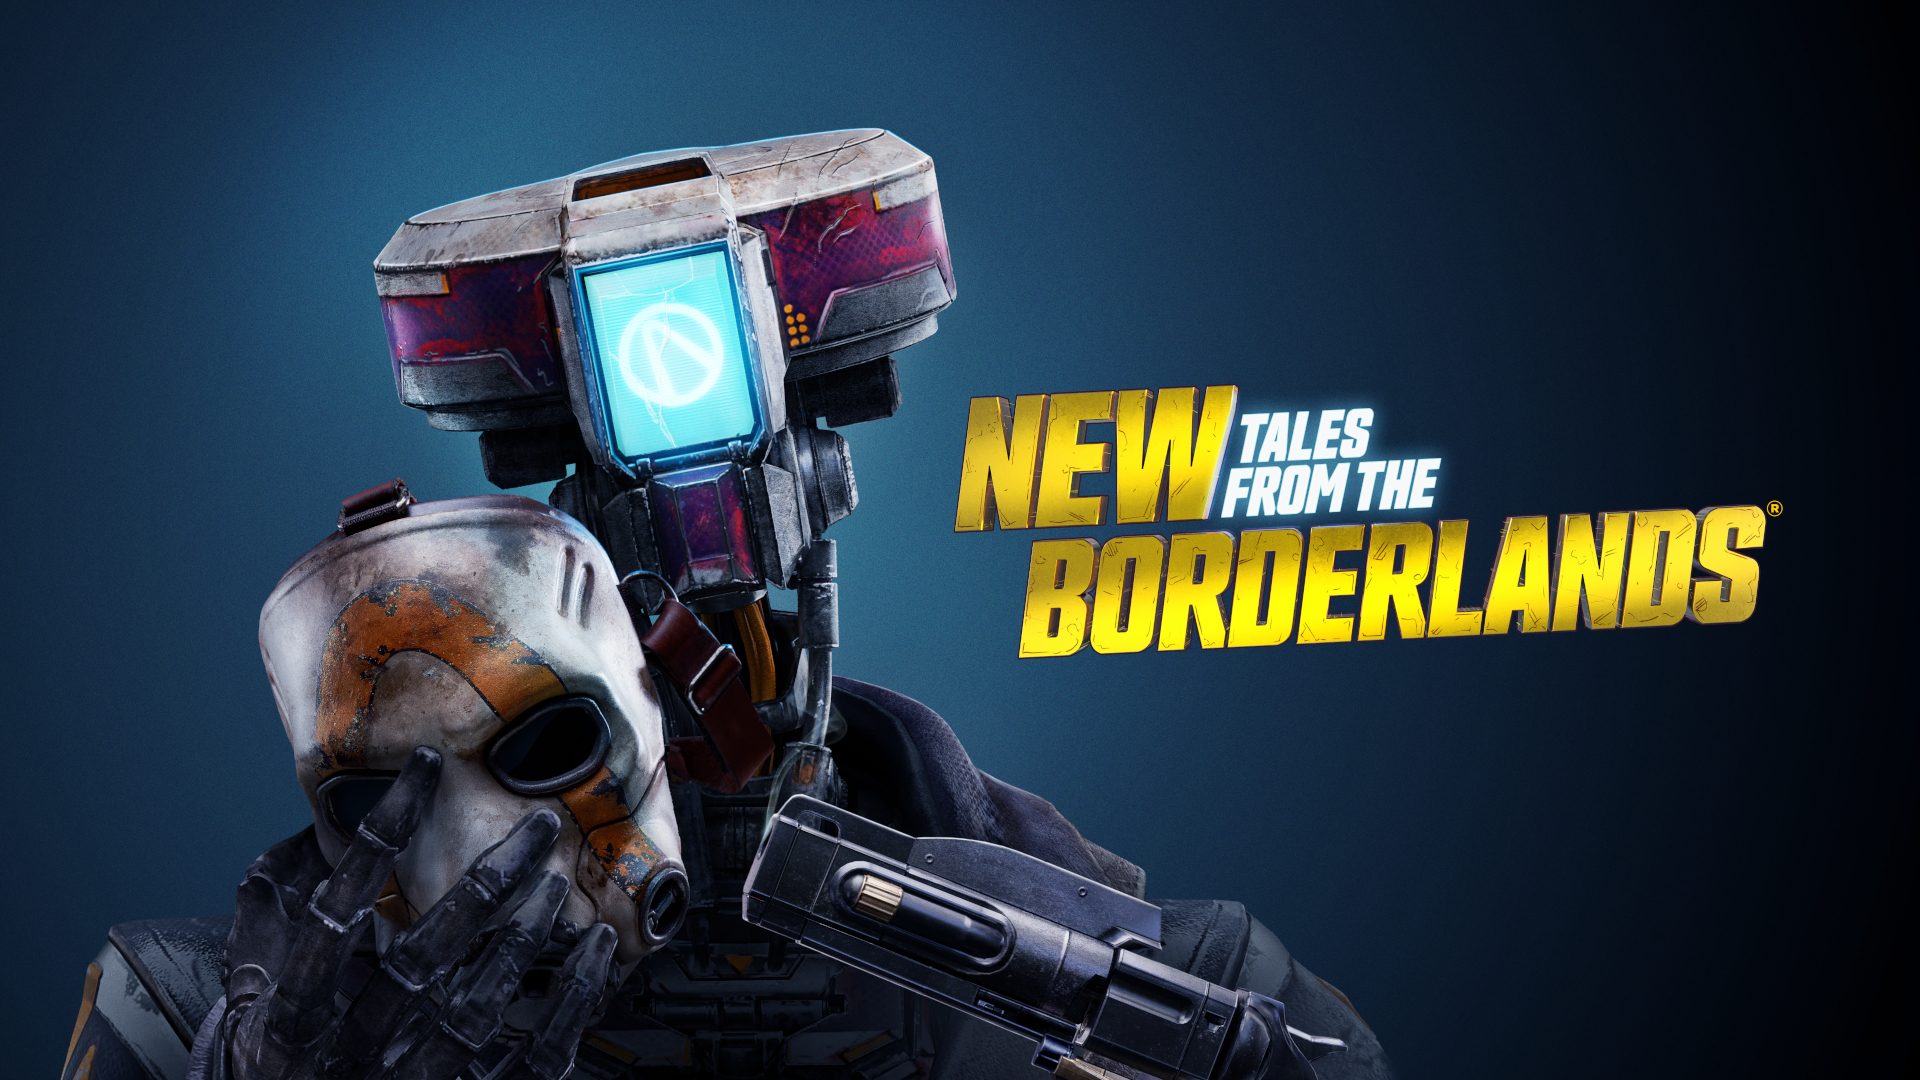 How Gearbox designed New Tales from the Borderlands as a spiritual successor – PlayStation.Blog